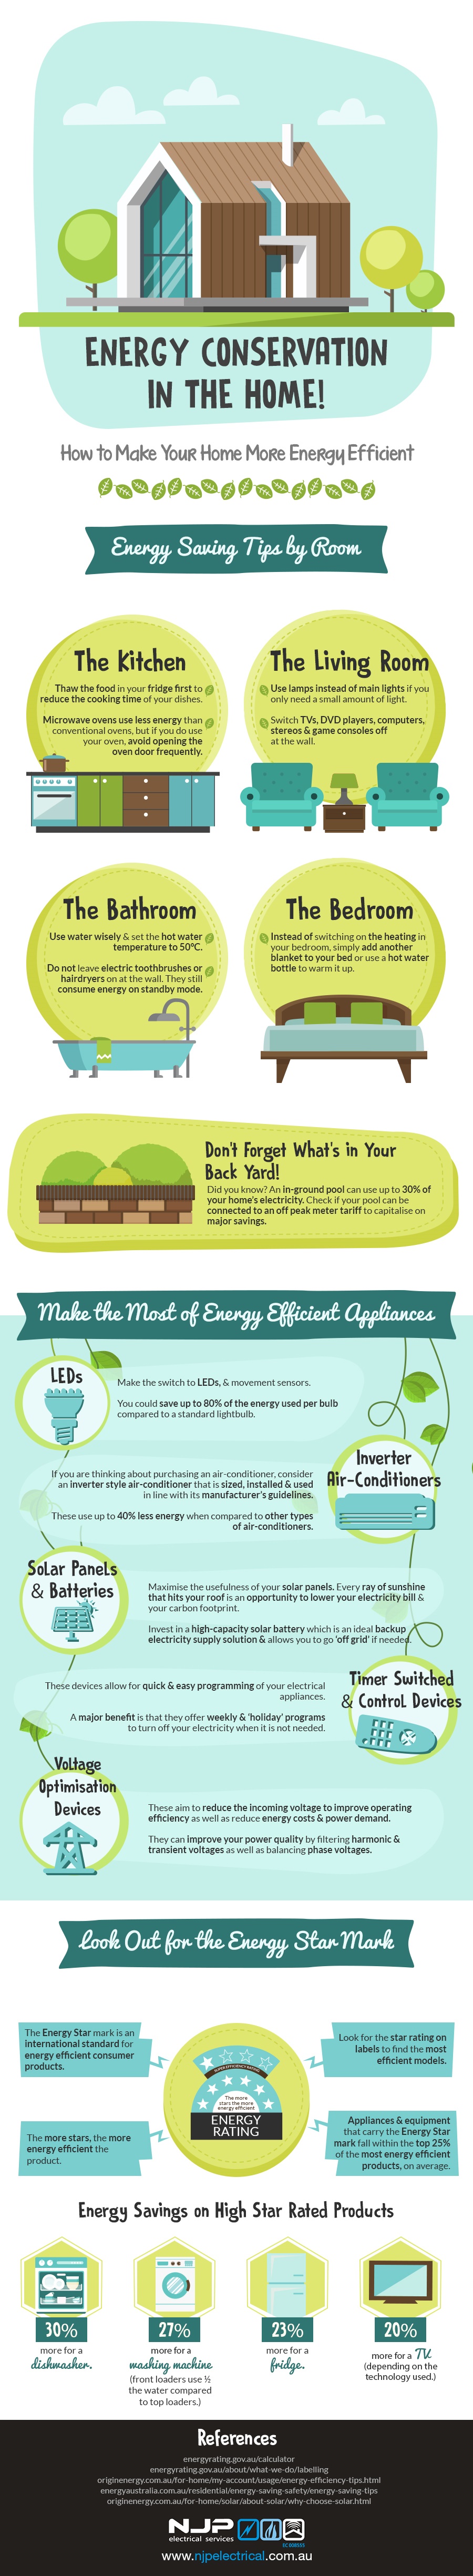 Energy-Conservation- in-the- Home-Infographic